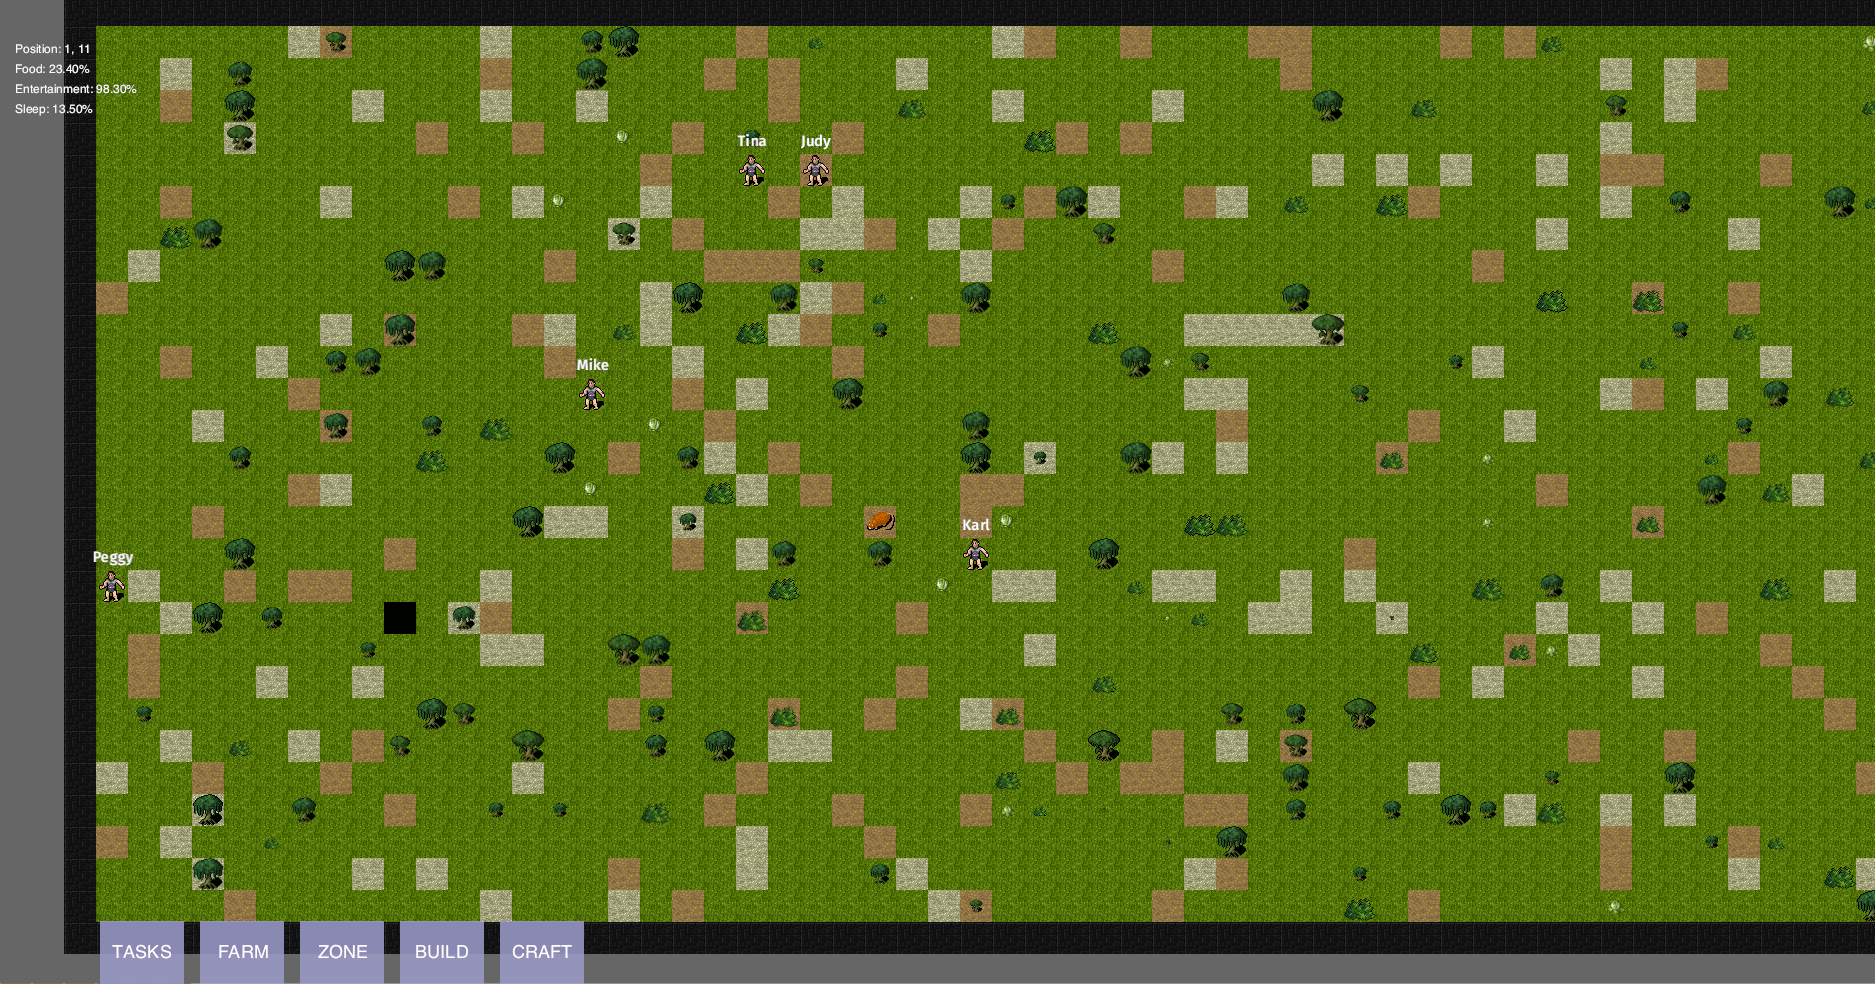 tiled map with lots of grass and trees, some resources and a couple of named pawns